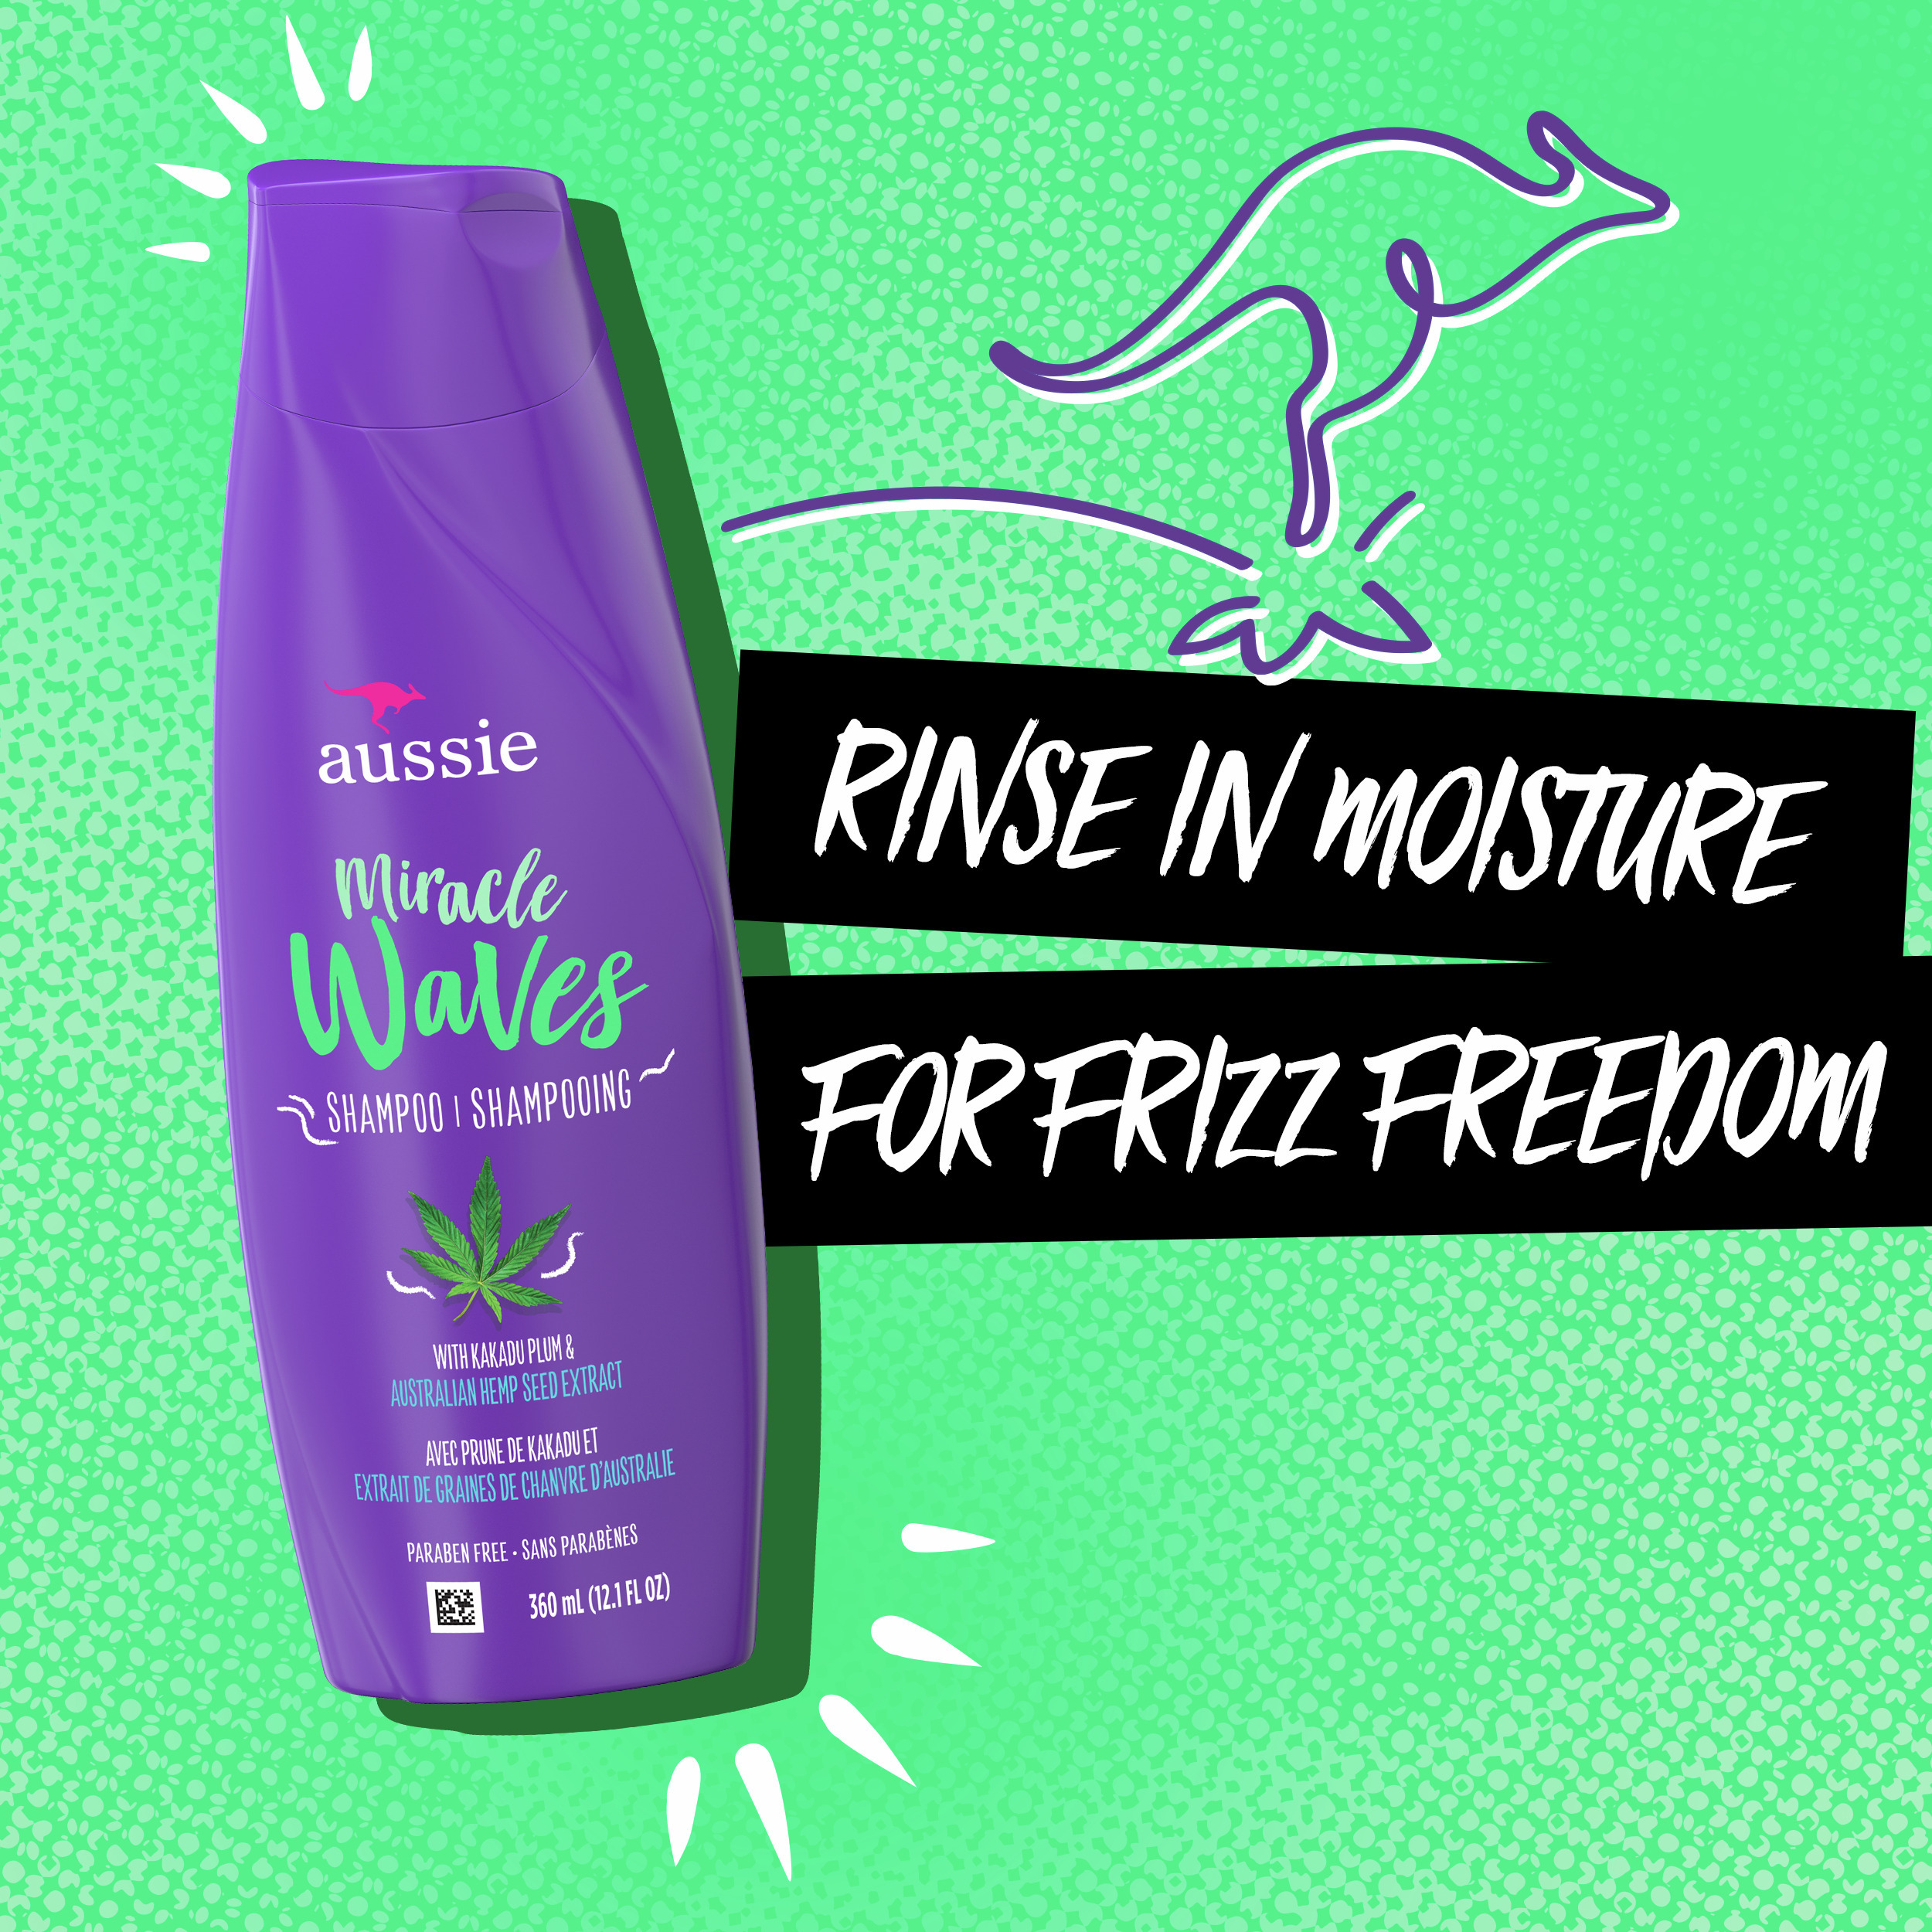 Aussie Miracle Waves Anti-Frizz Hemp Paraben-Free Shampoo, 26.2 fl oz for All Hair Types - image 5 of 8